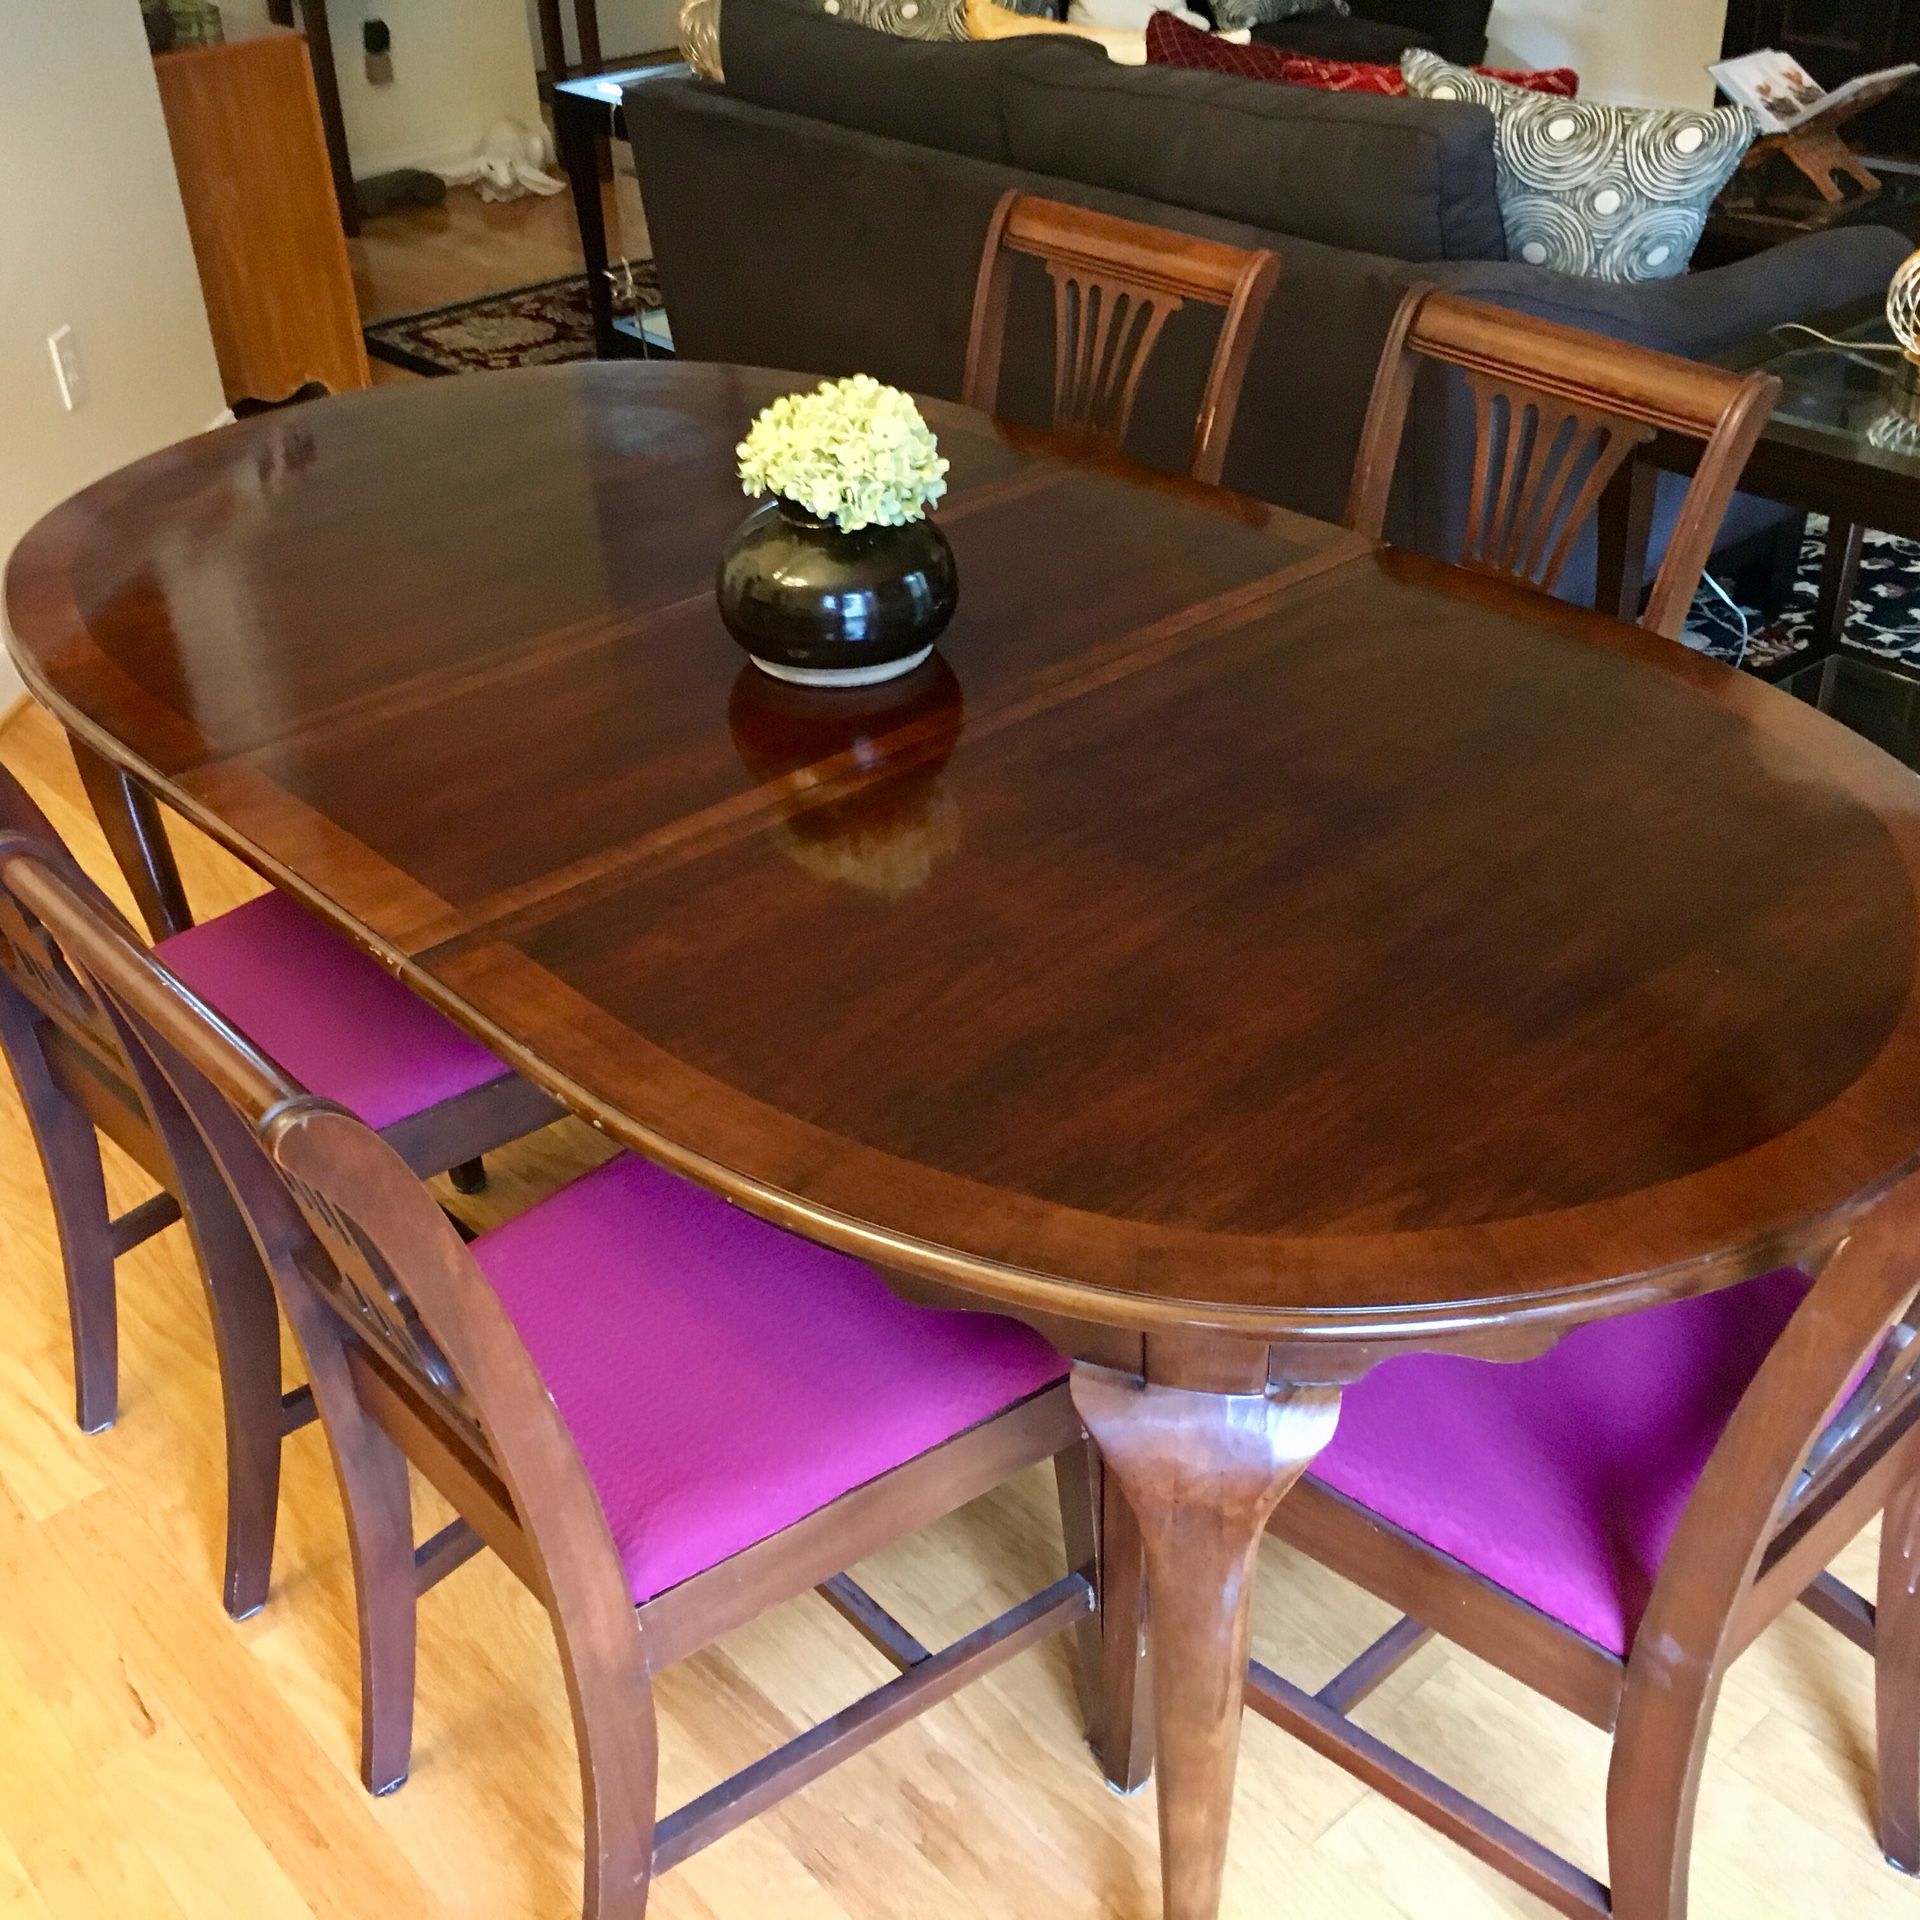 Antique dining room table with six chairs